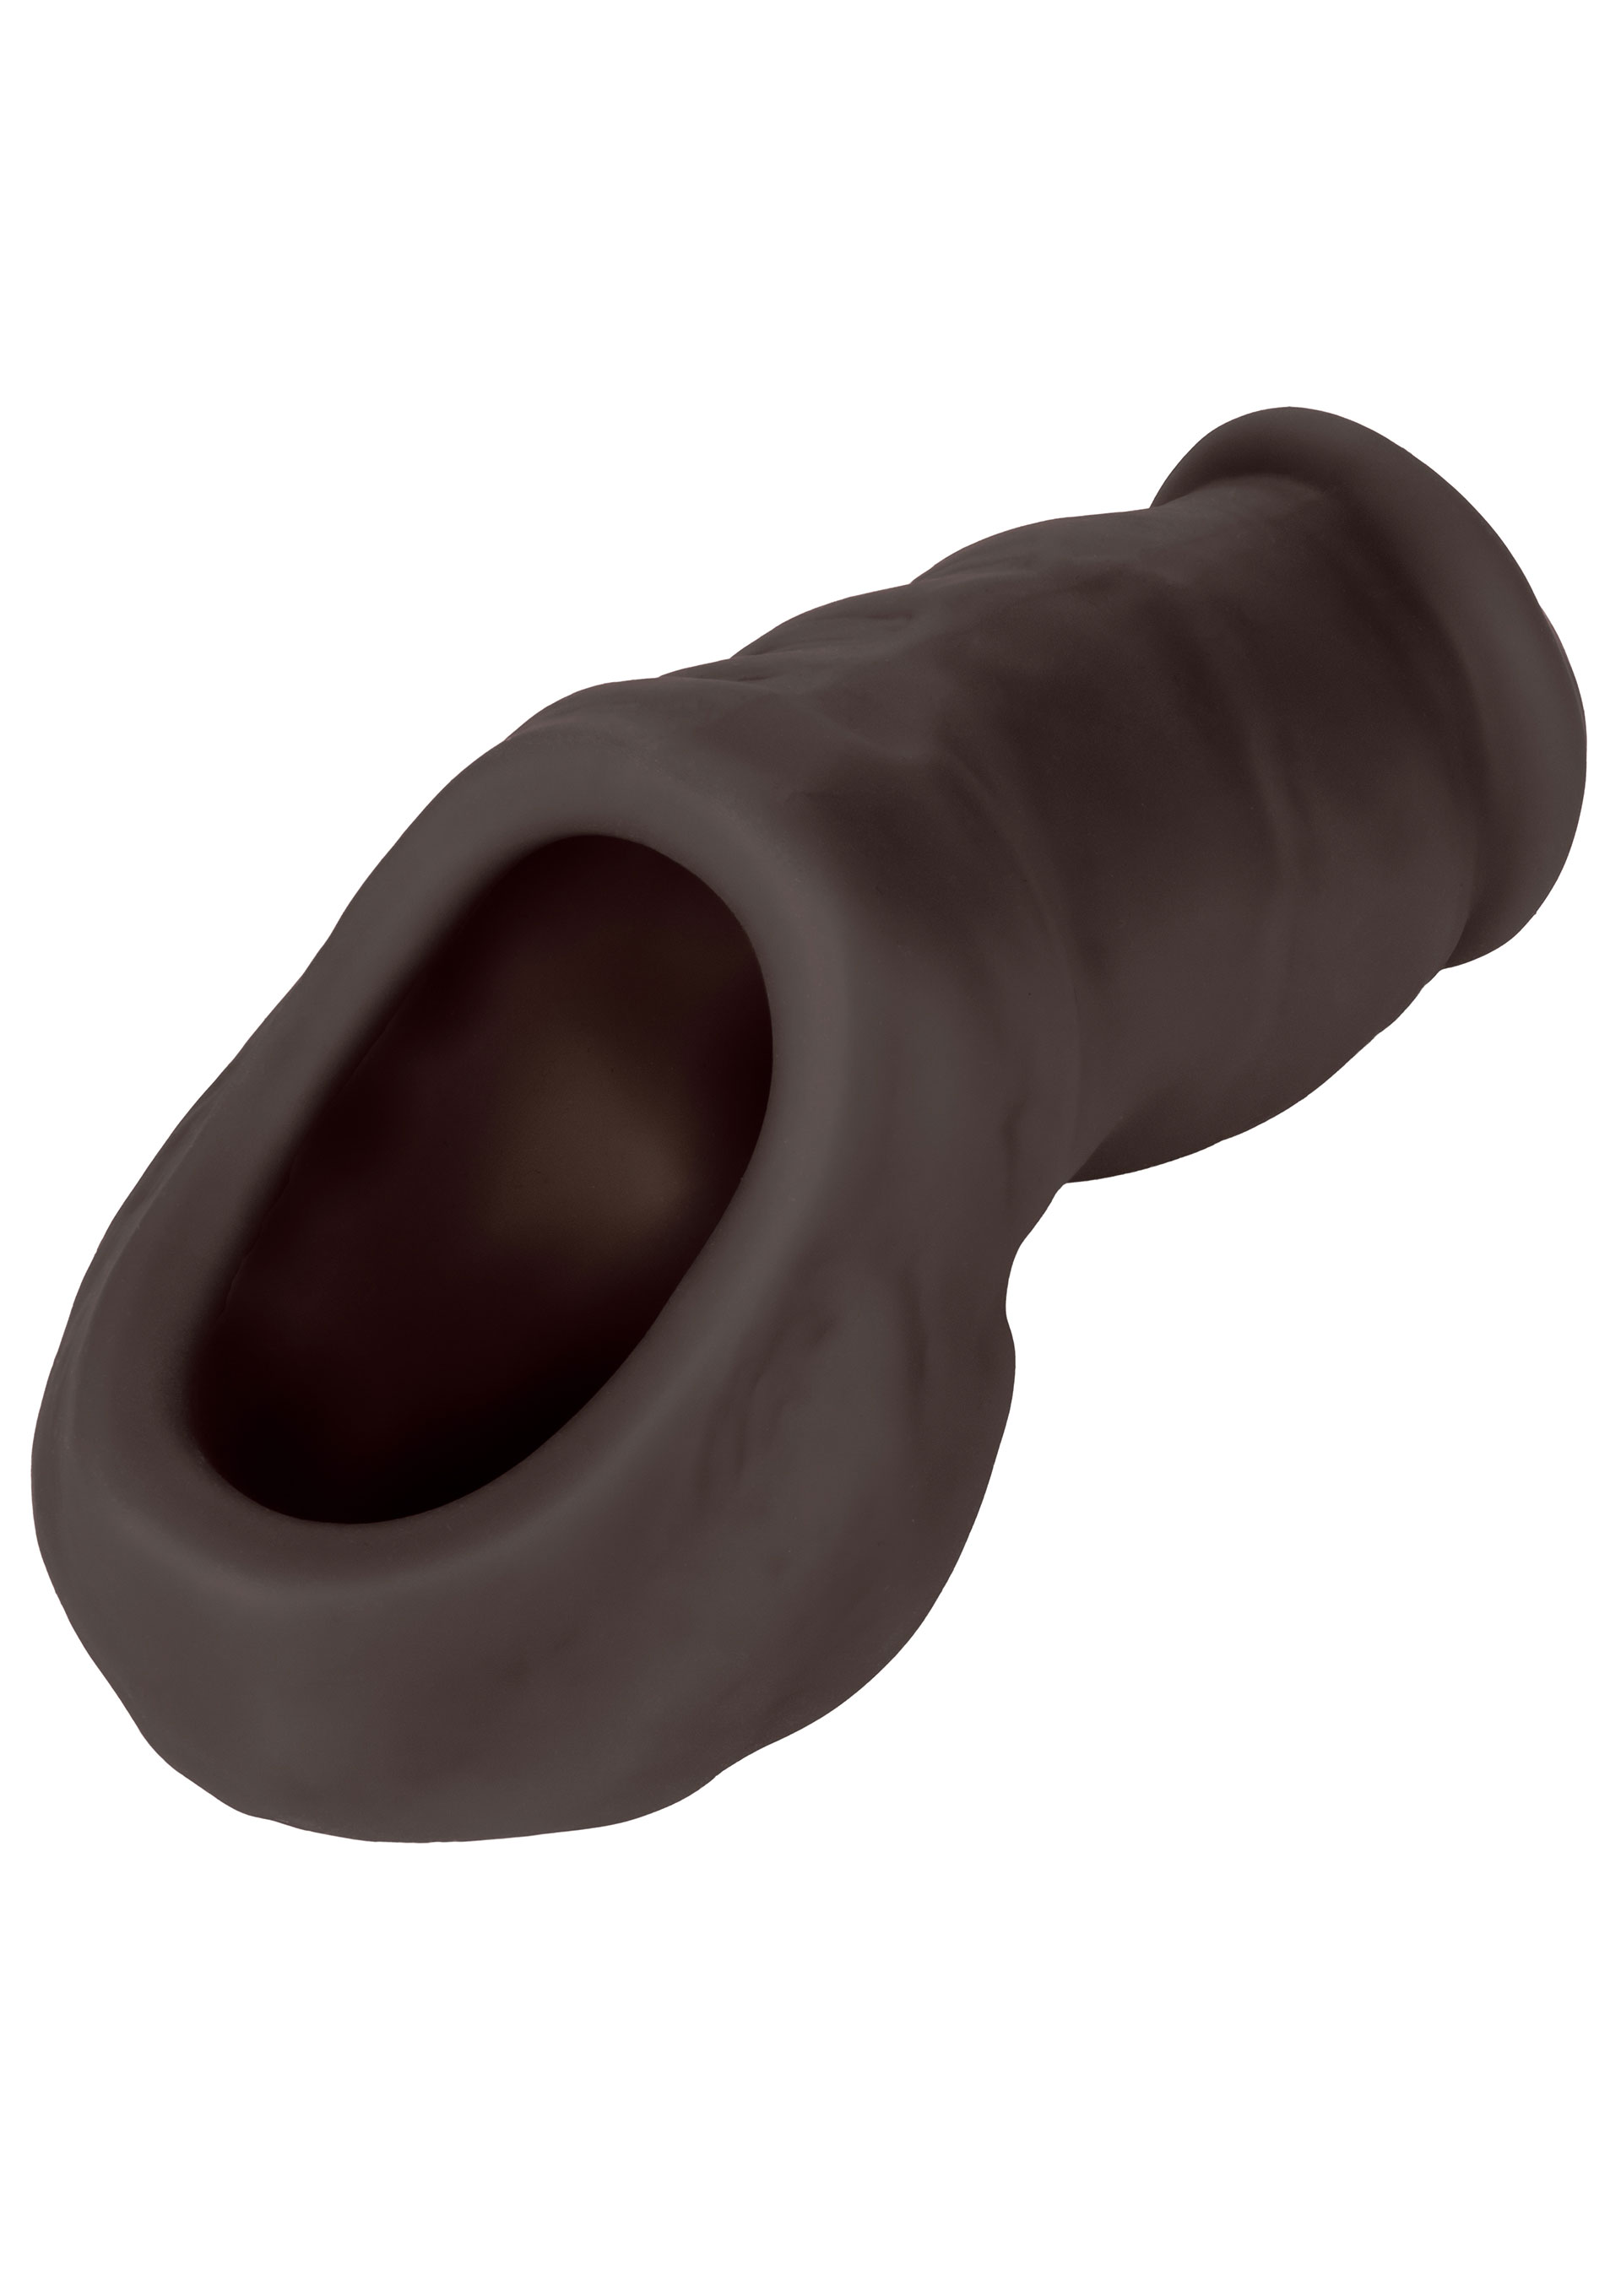 SEXTOY MULHER Terapeuticos SOFT SILICONE STAND-TO-PEE BLACK SOFT SILICONE STAND-TO-PEE BLACK